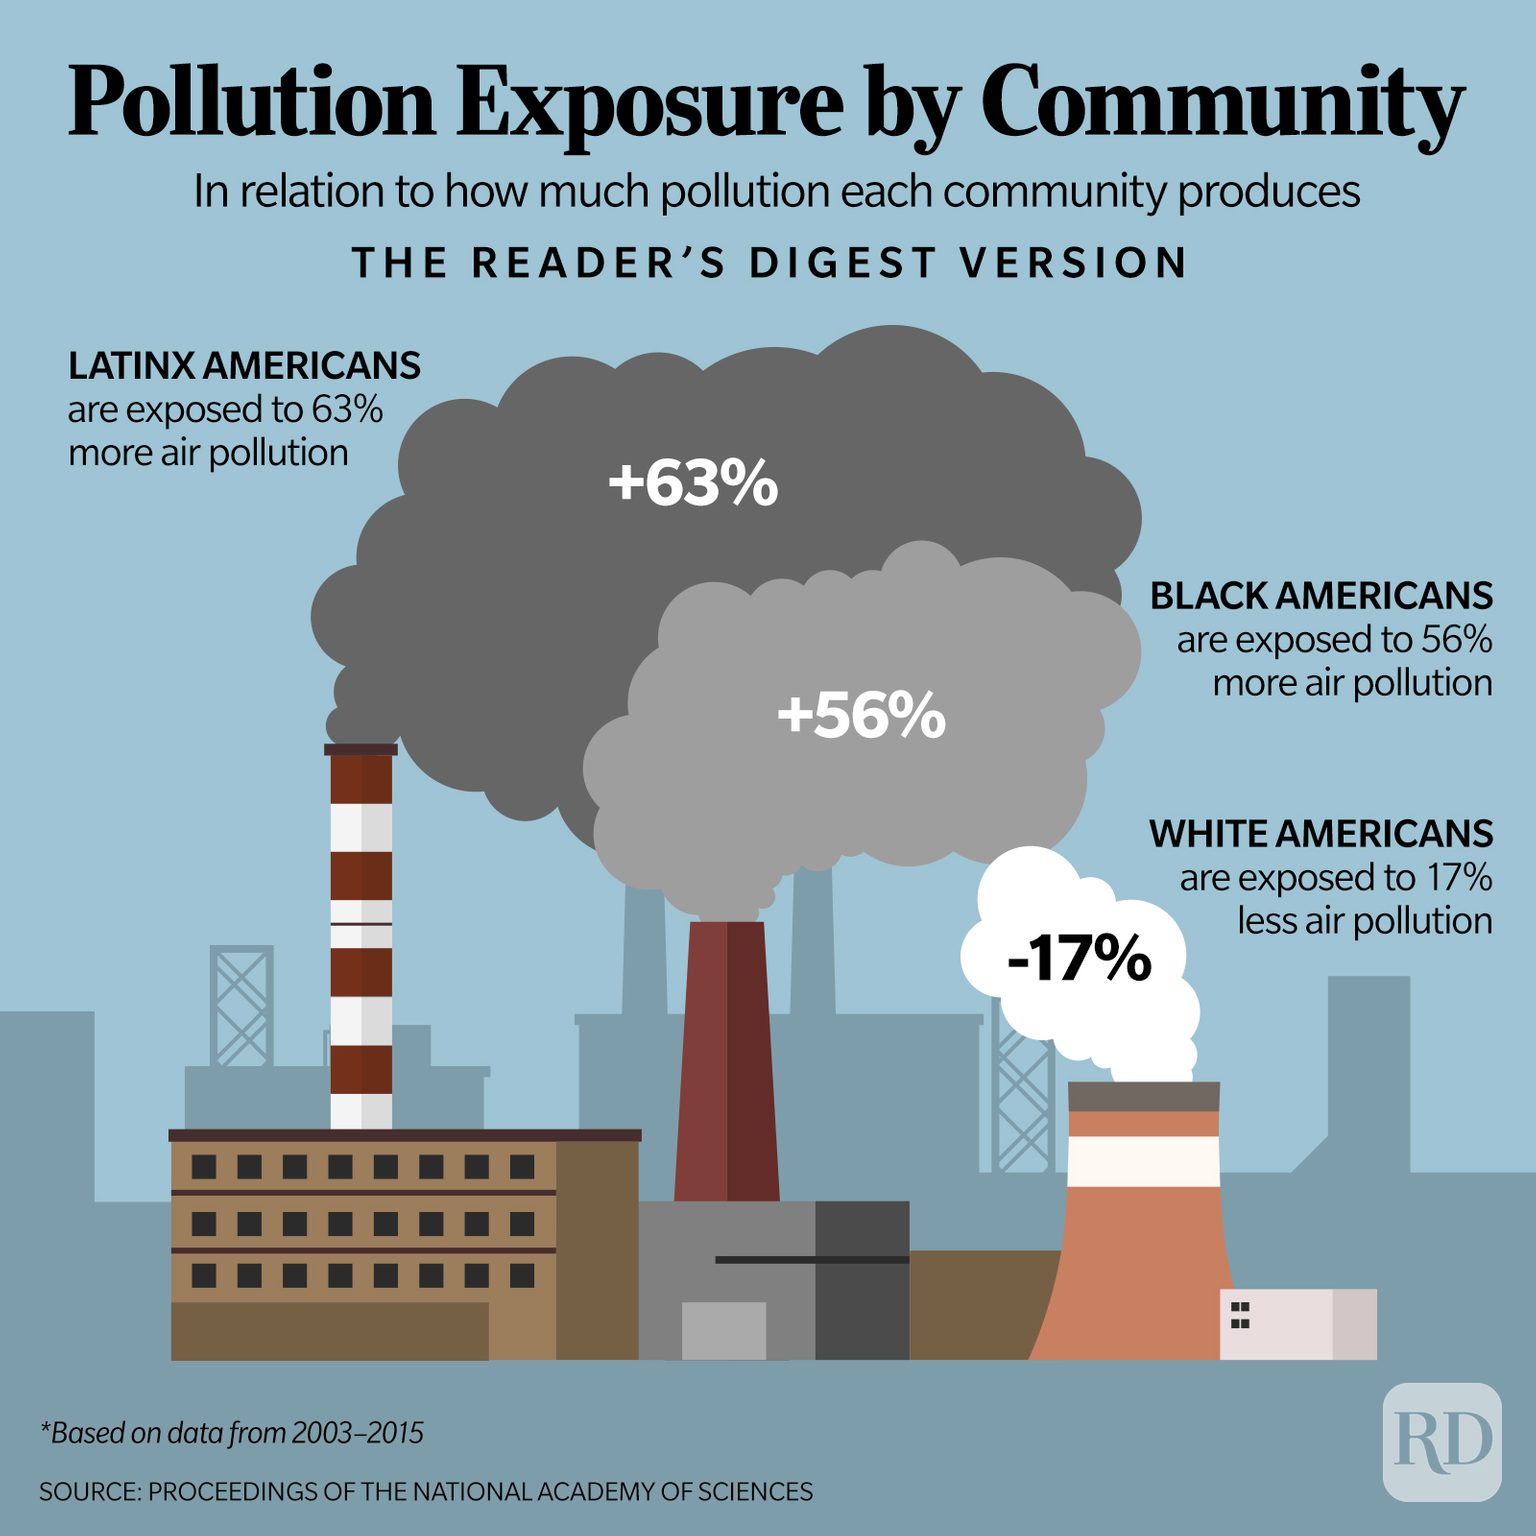 the environmental racism thesis falls within